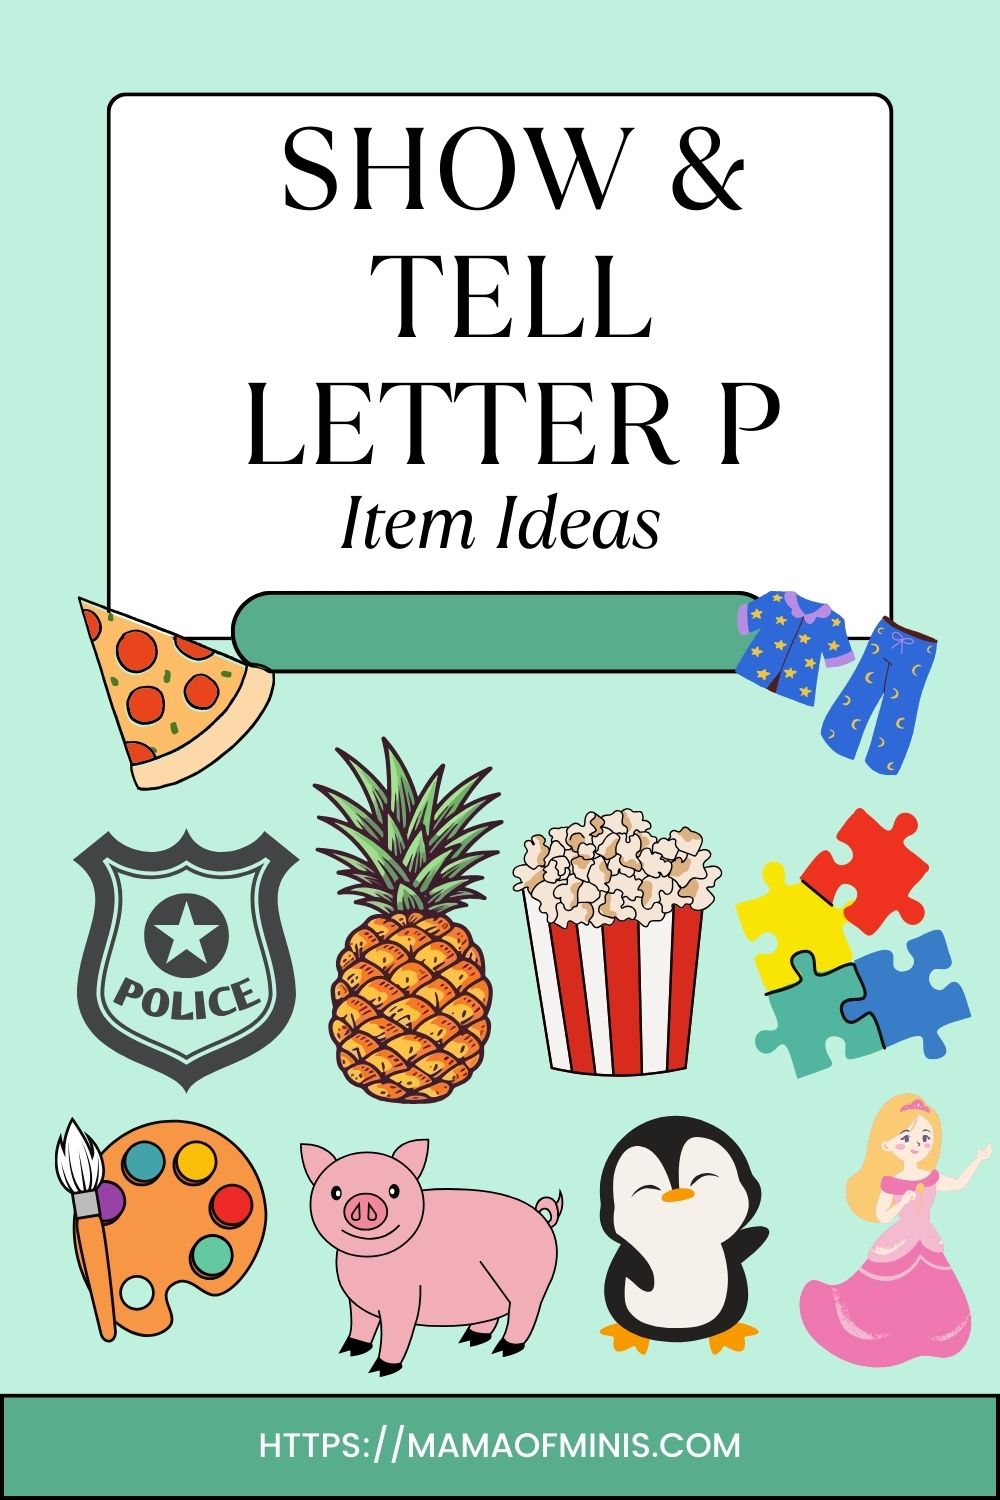 Item Ideas for Show and Tell Letter P